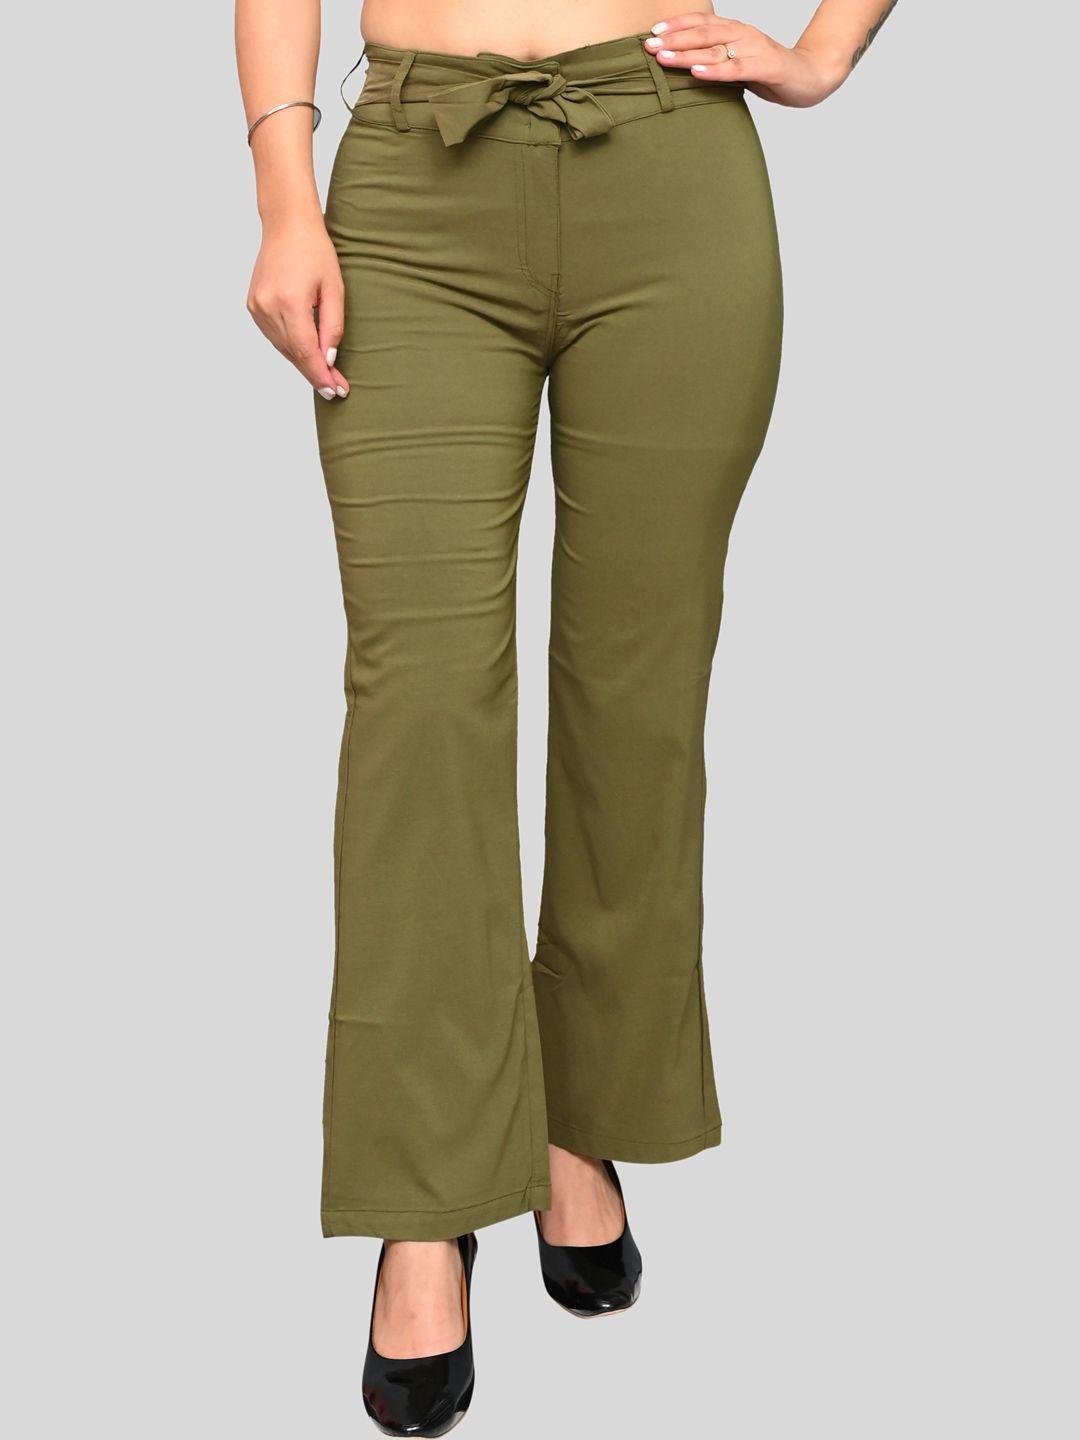 fnocks-women-olive-green-relaxed-straight-leg-trousers